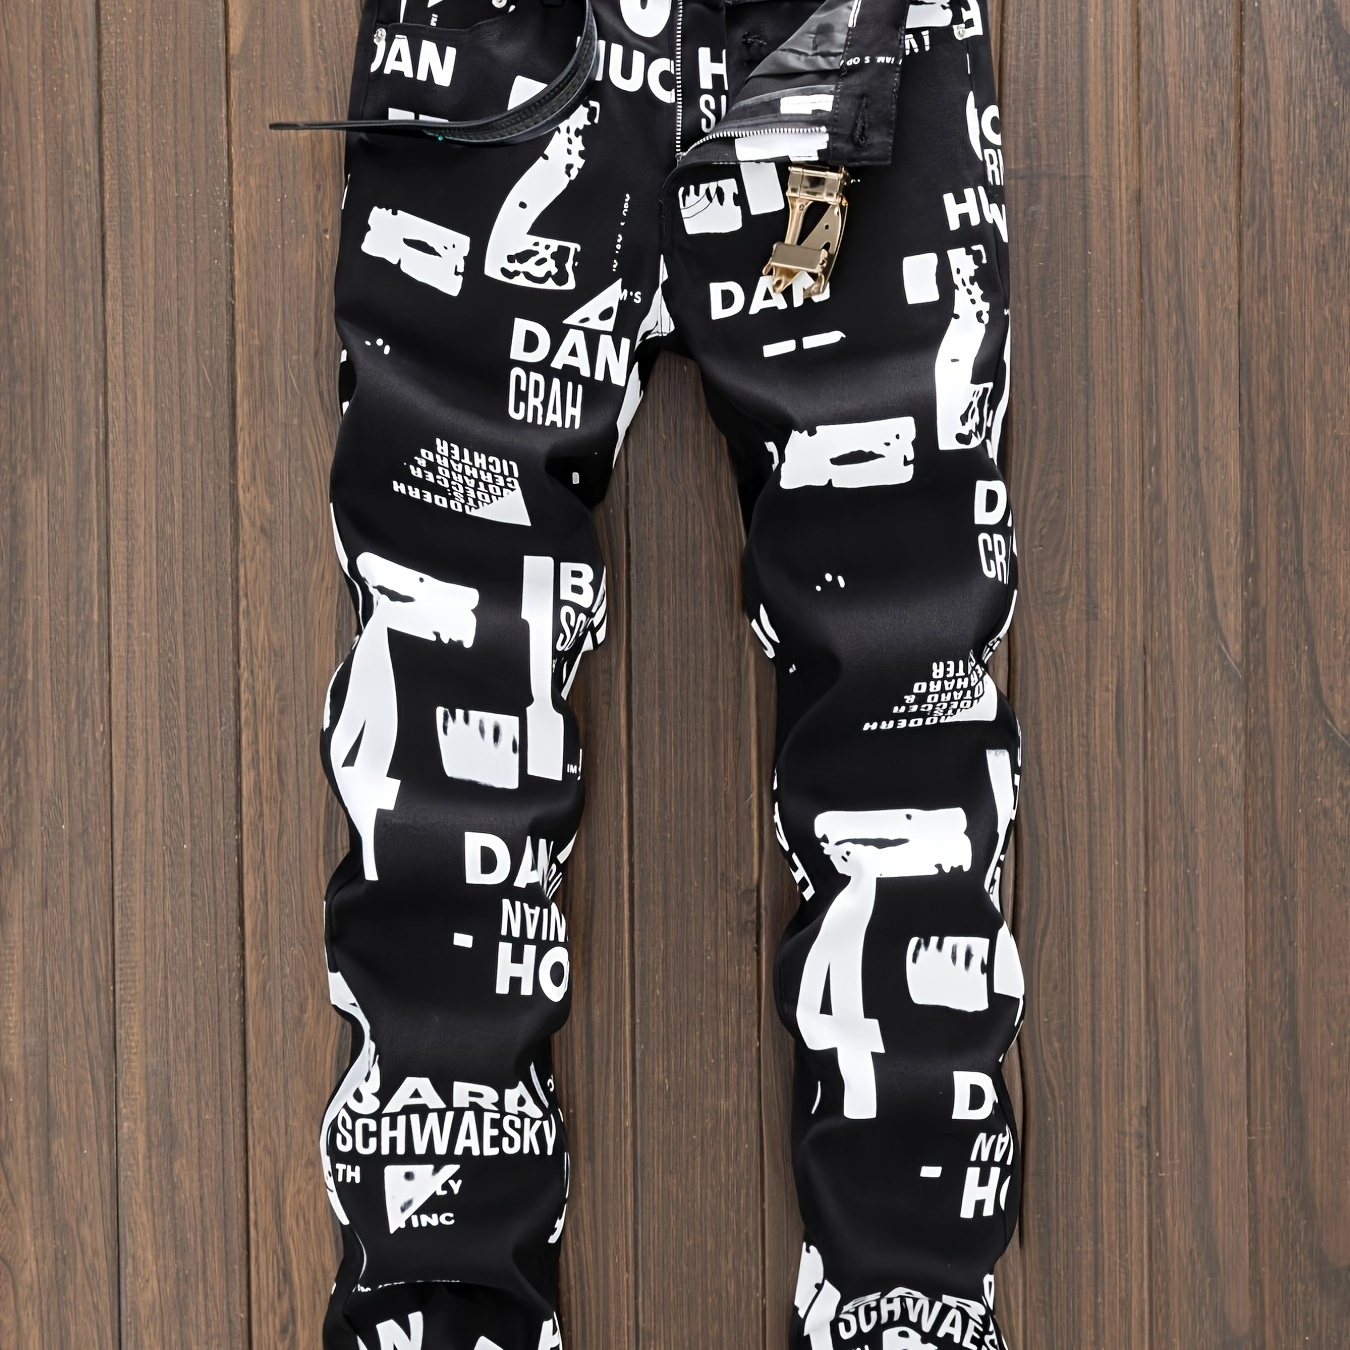 

Fashionable Design Men's Contrast Color Letter And Paint Mark Print Cotton Blend Slim Fit Denim Pants, Chic And Stylish Jeans For Street And Daily Leisurewear